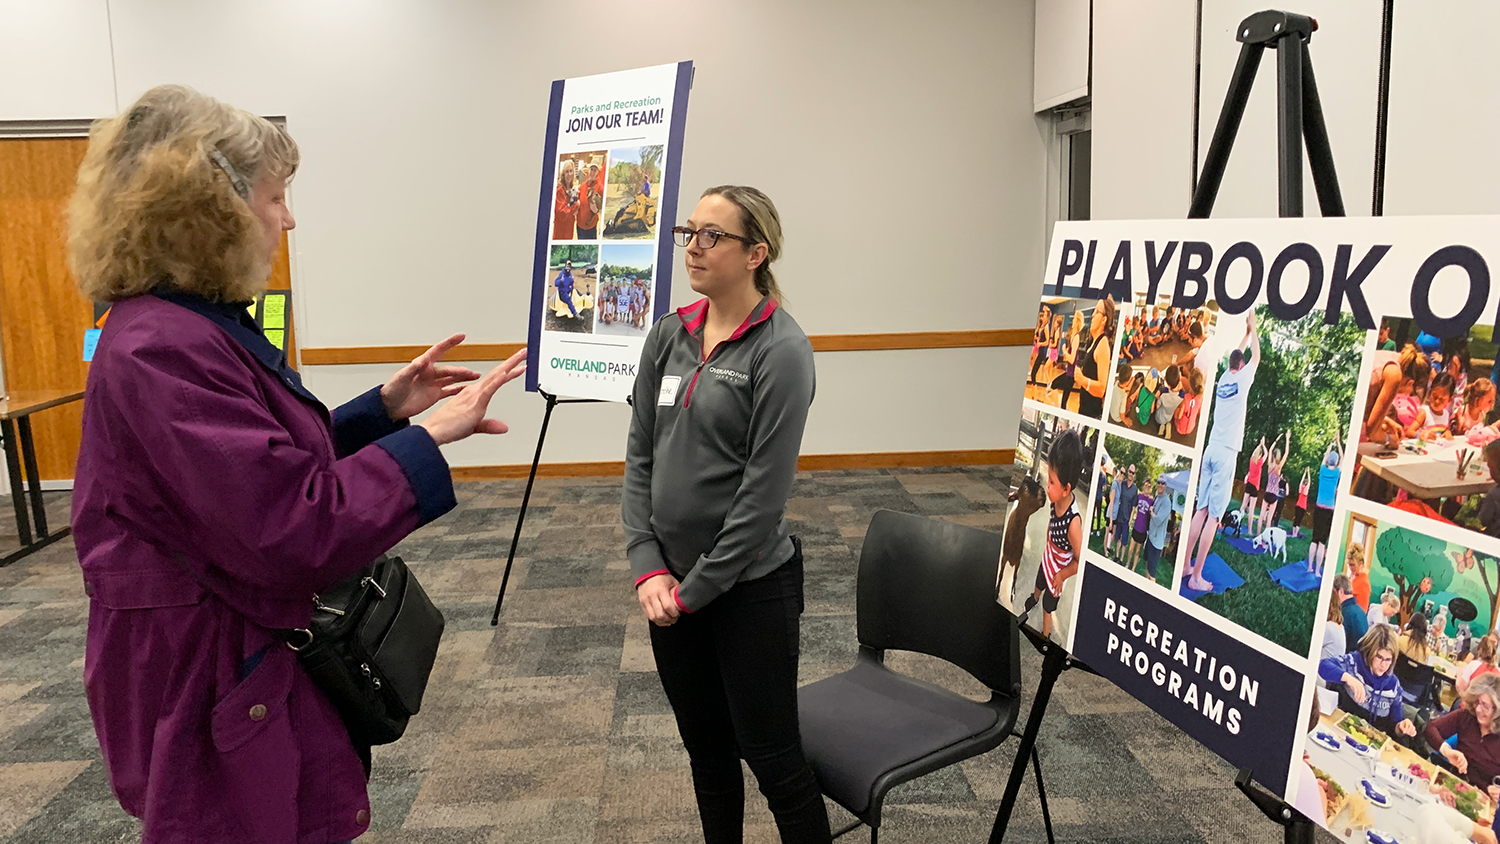 Resident speaks with a City staff member at the Playbook OP open house event.